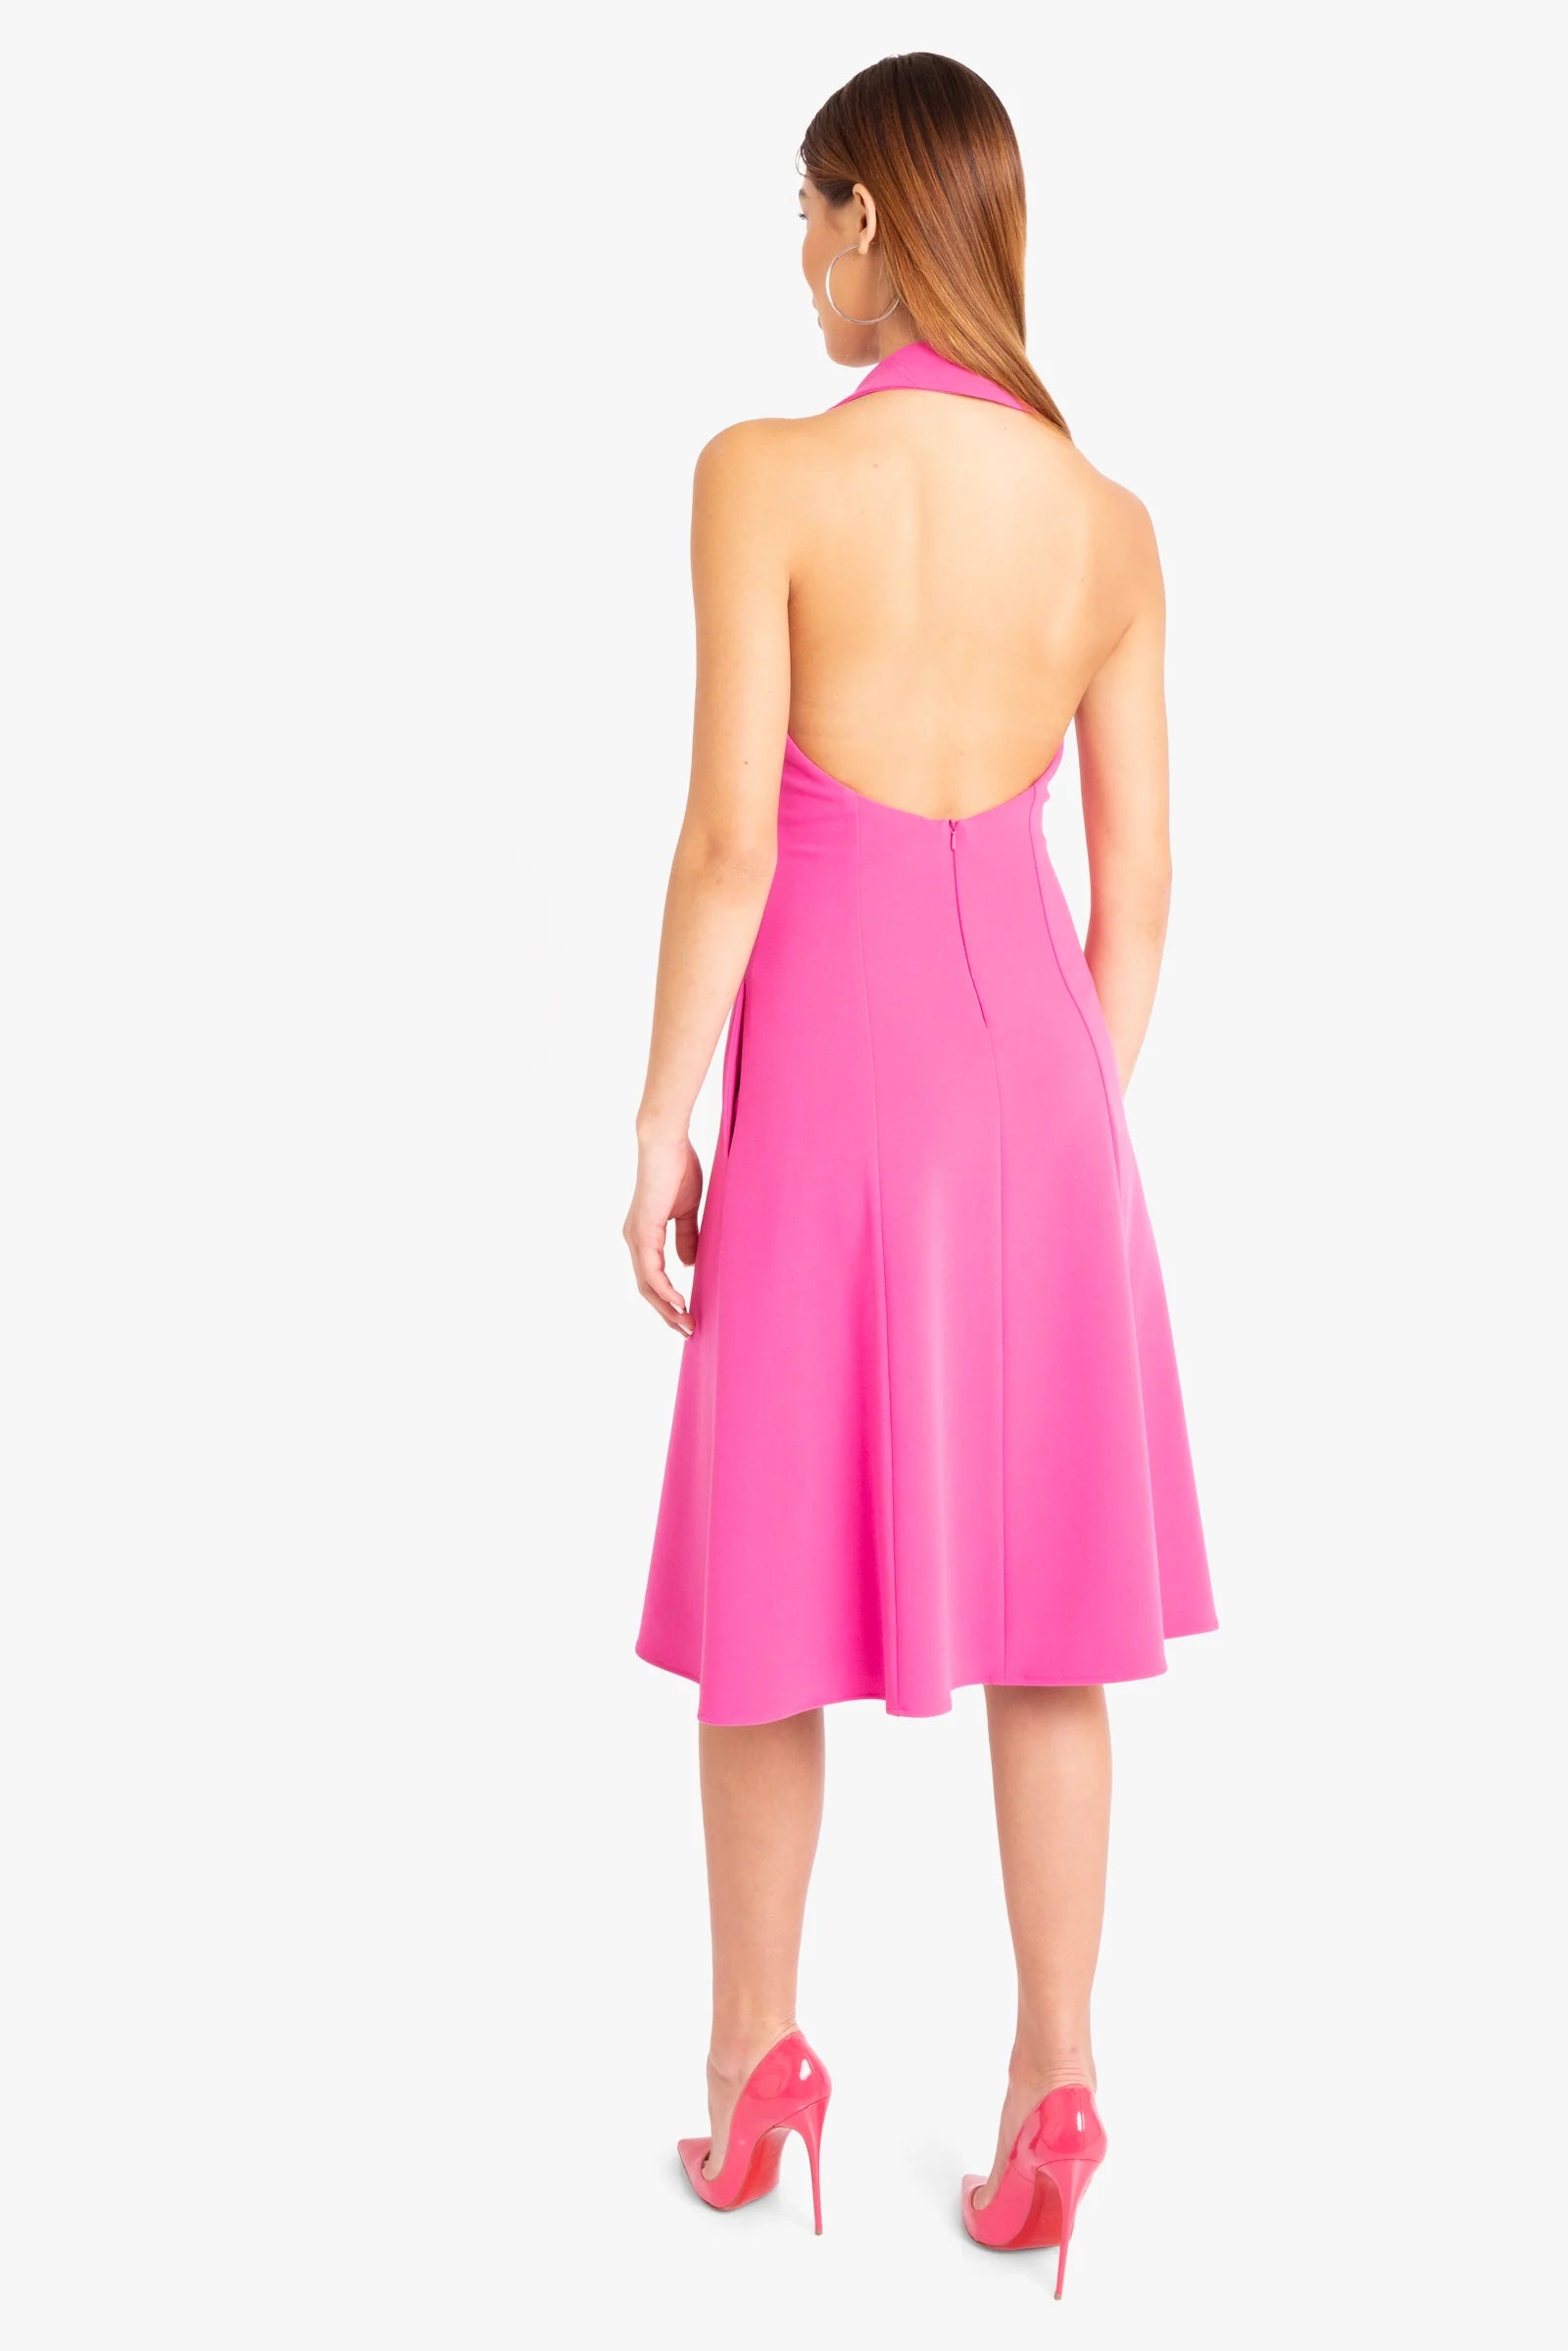 Lathan Dress in Pink by Black Halo